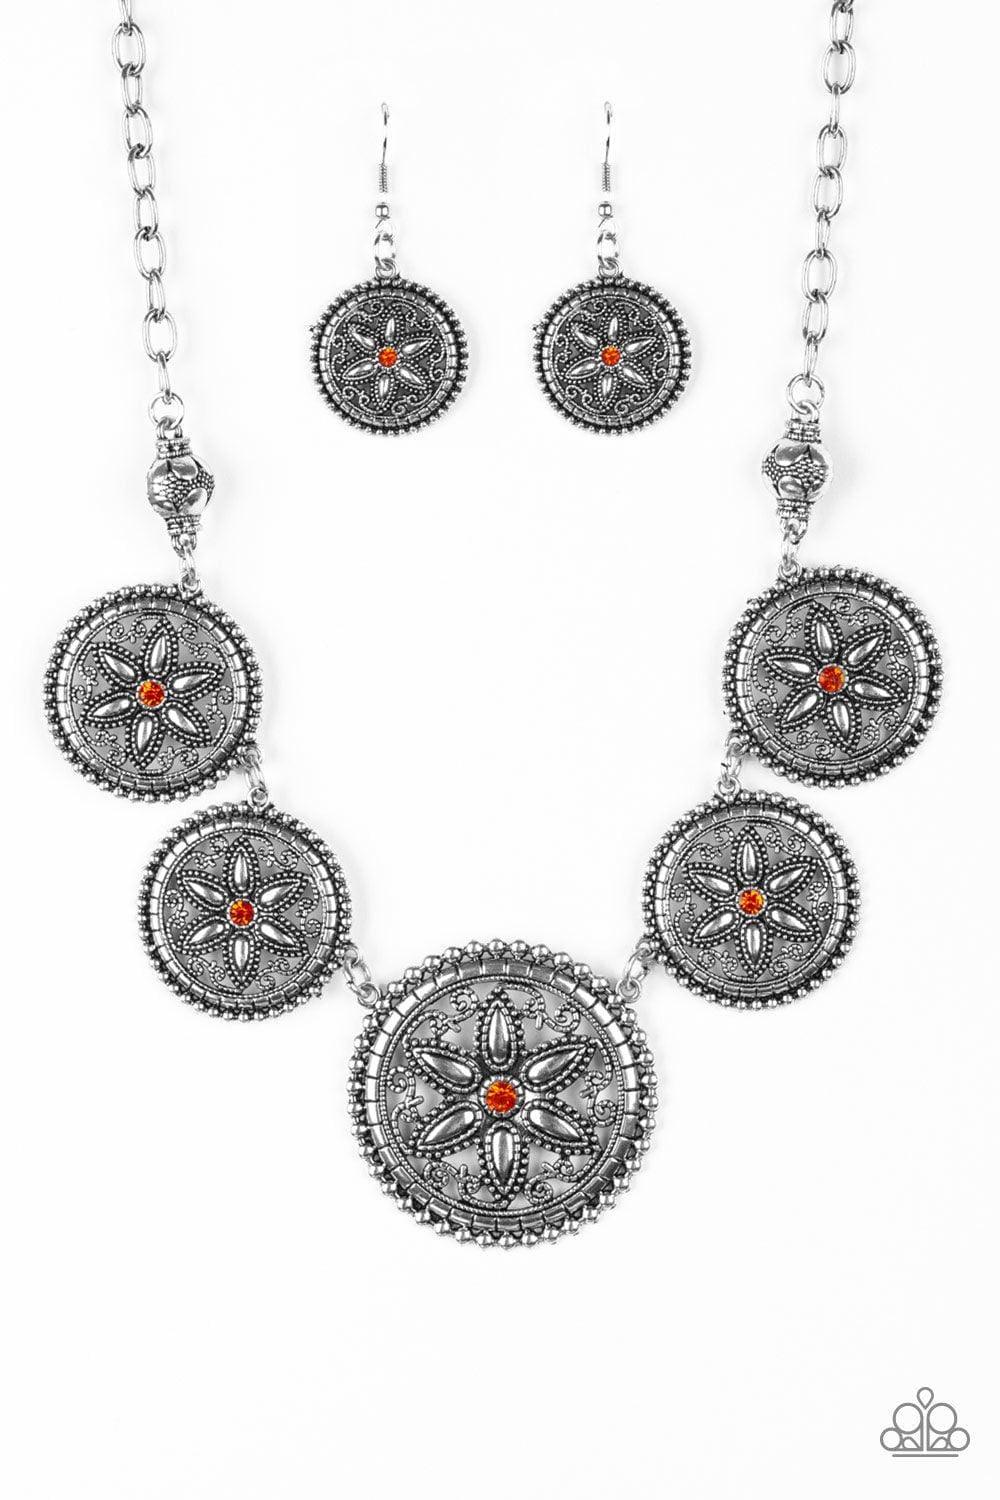 Paparazzi Accessories - Written In The Star Lilies - Orange Necklace - Bling by JessieK